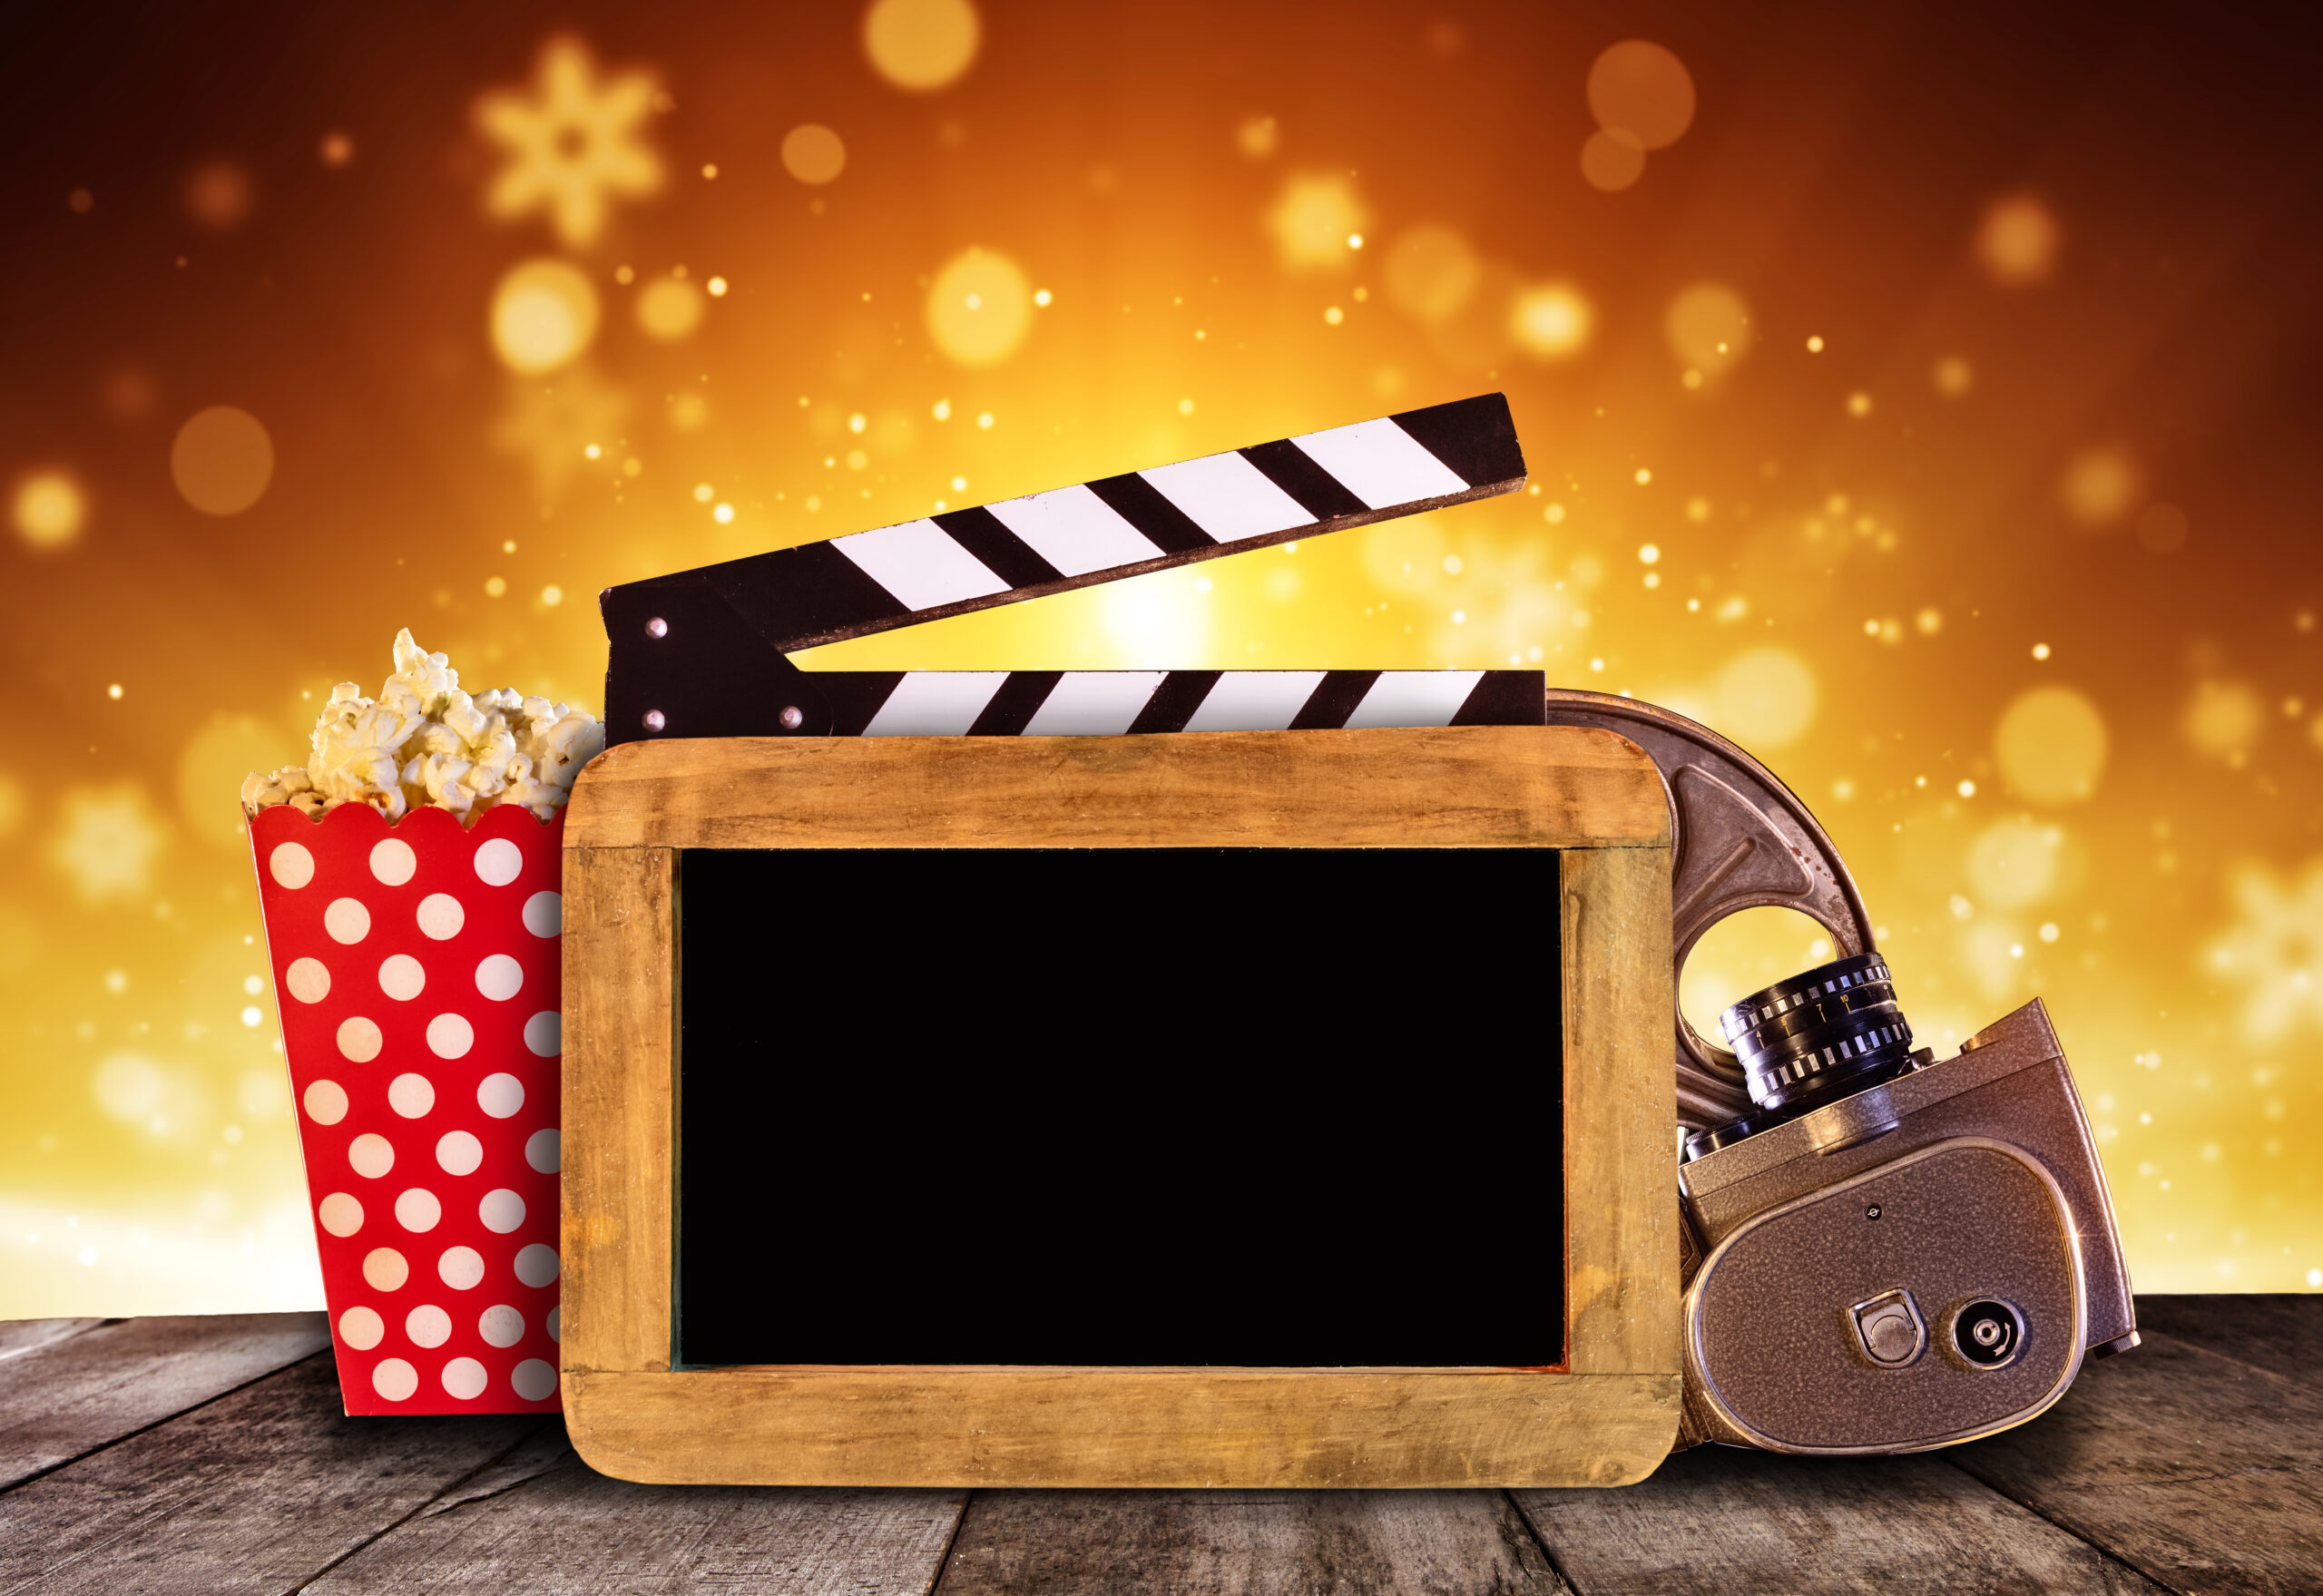 <h1 class="tribe-events-single-event-title">Movie Night at Brookings Public Library</h1>